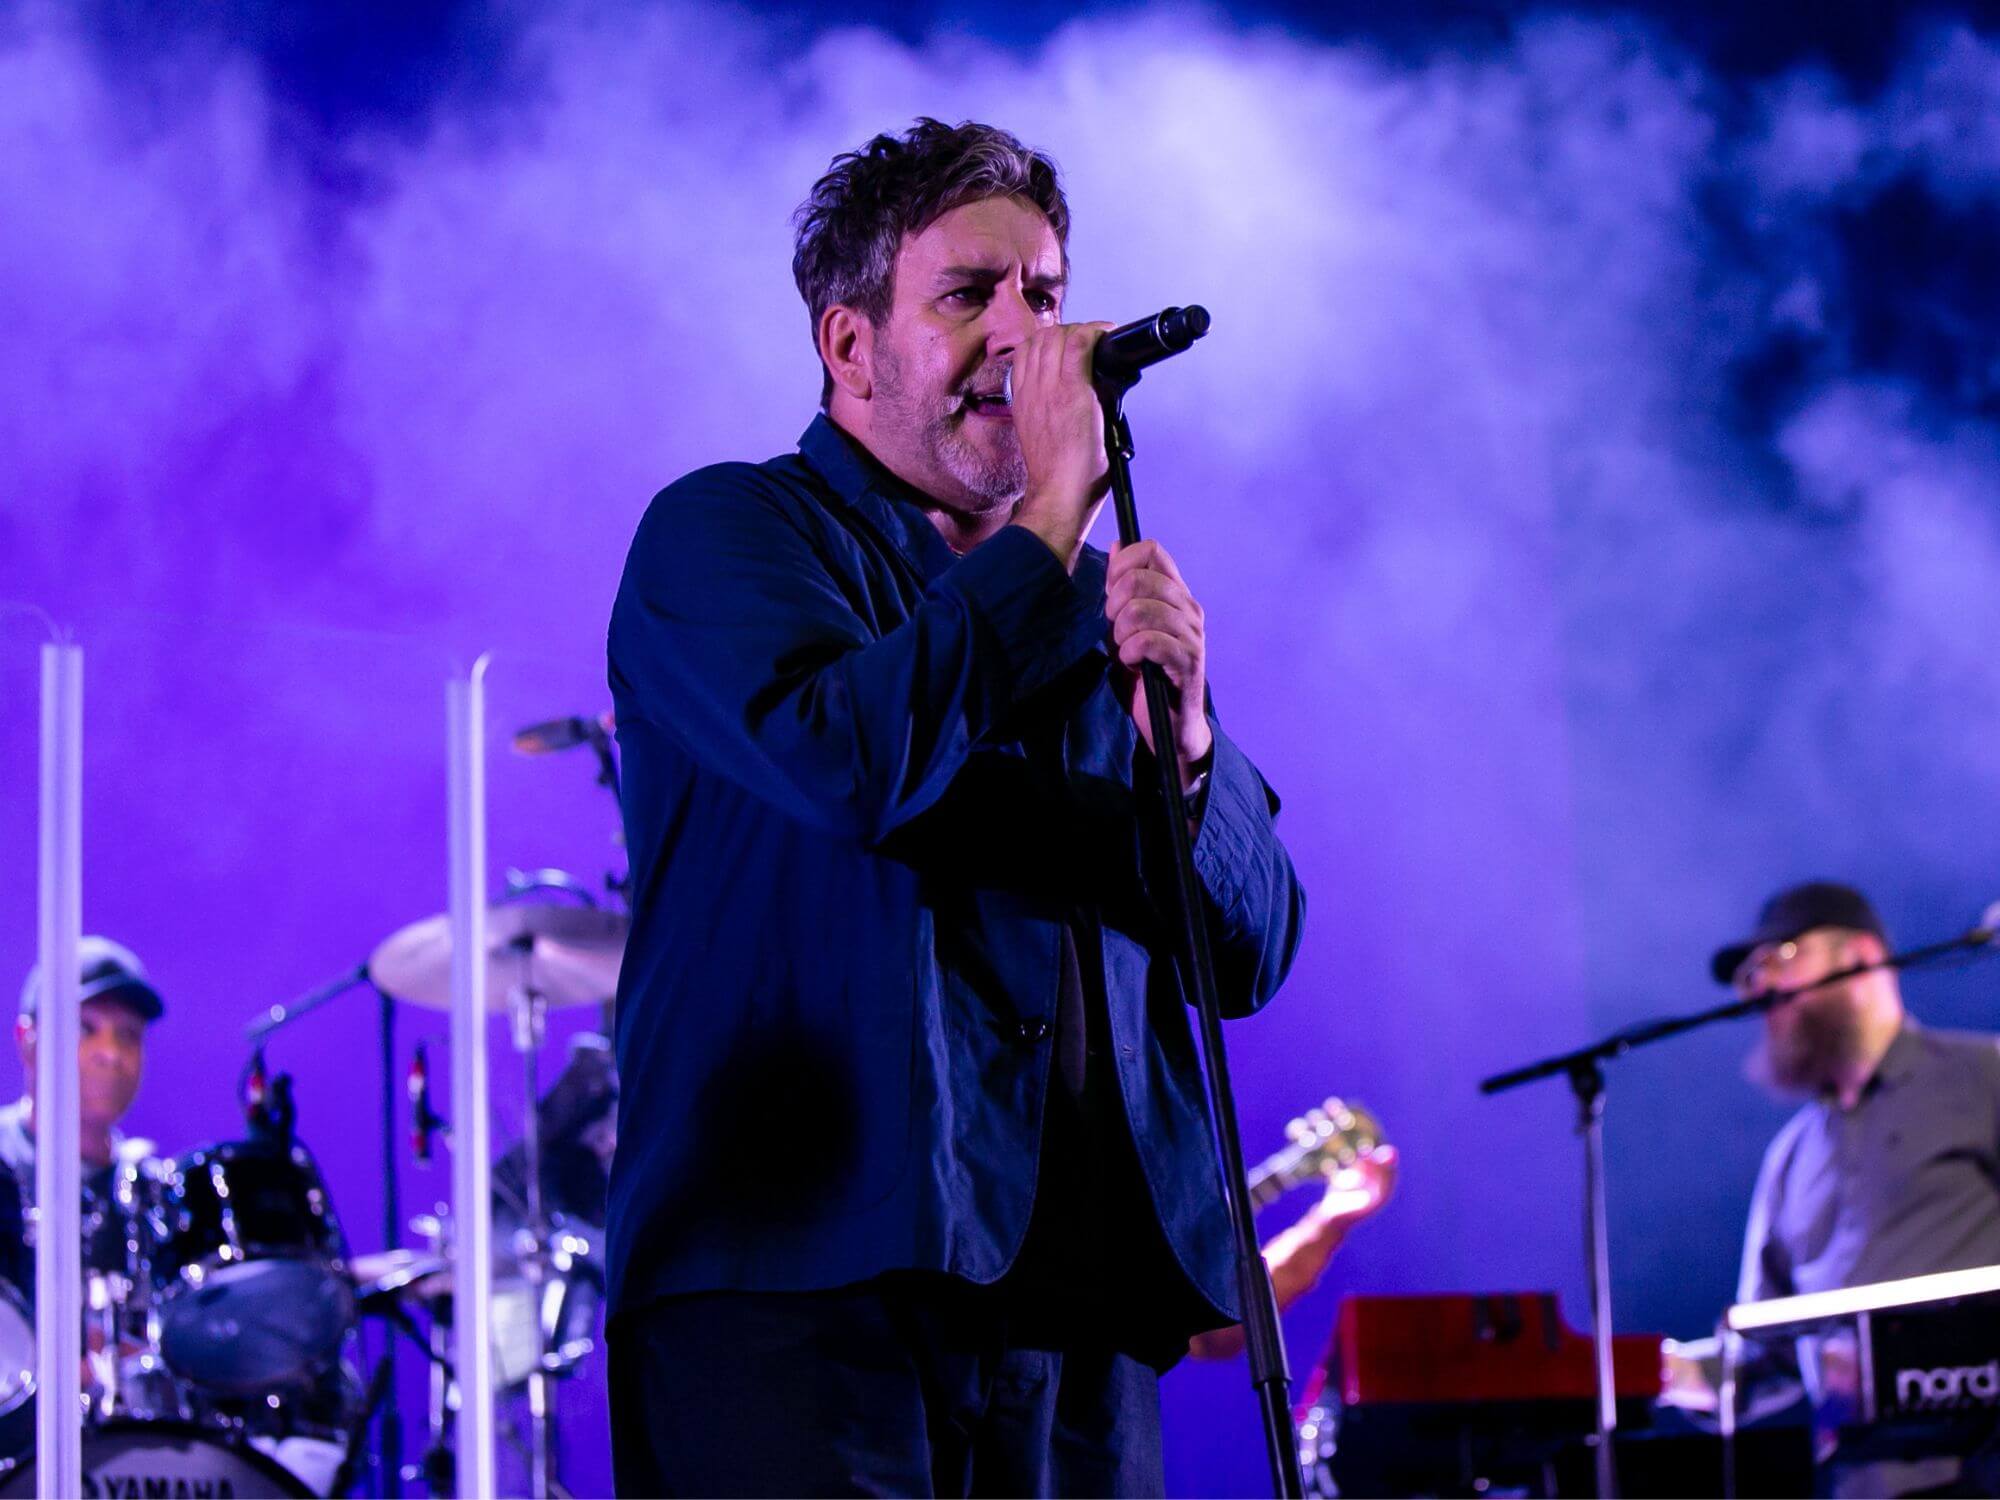 The Specials frontman Terry Hall